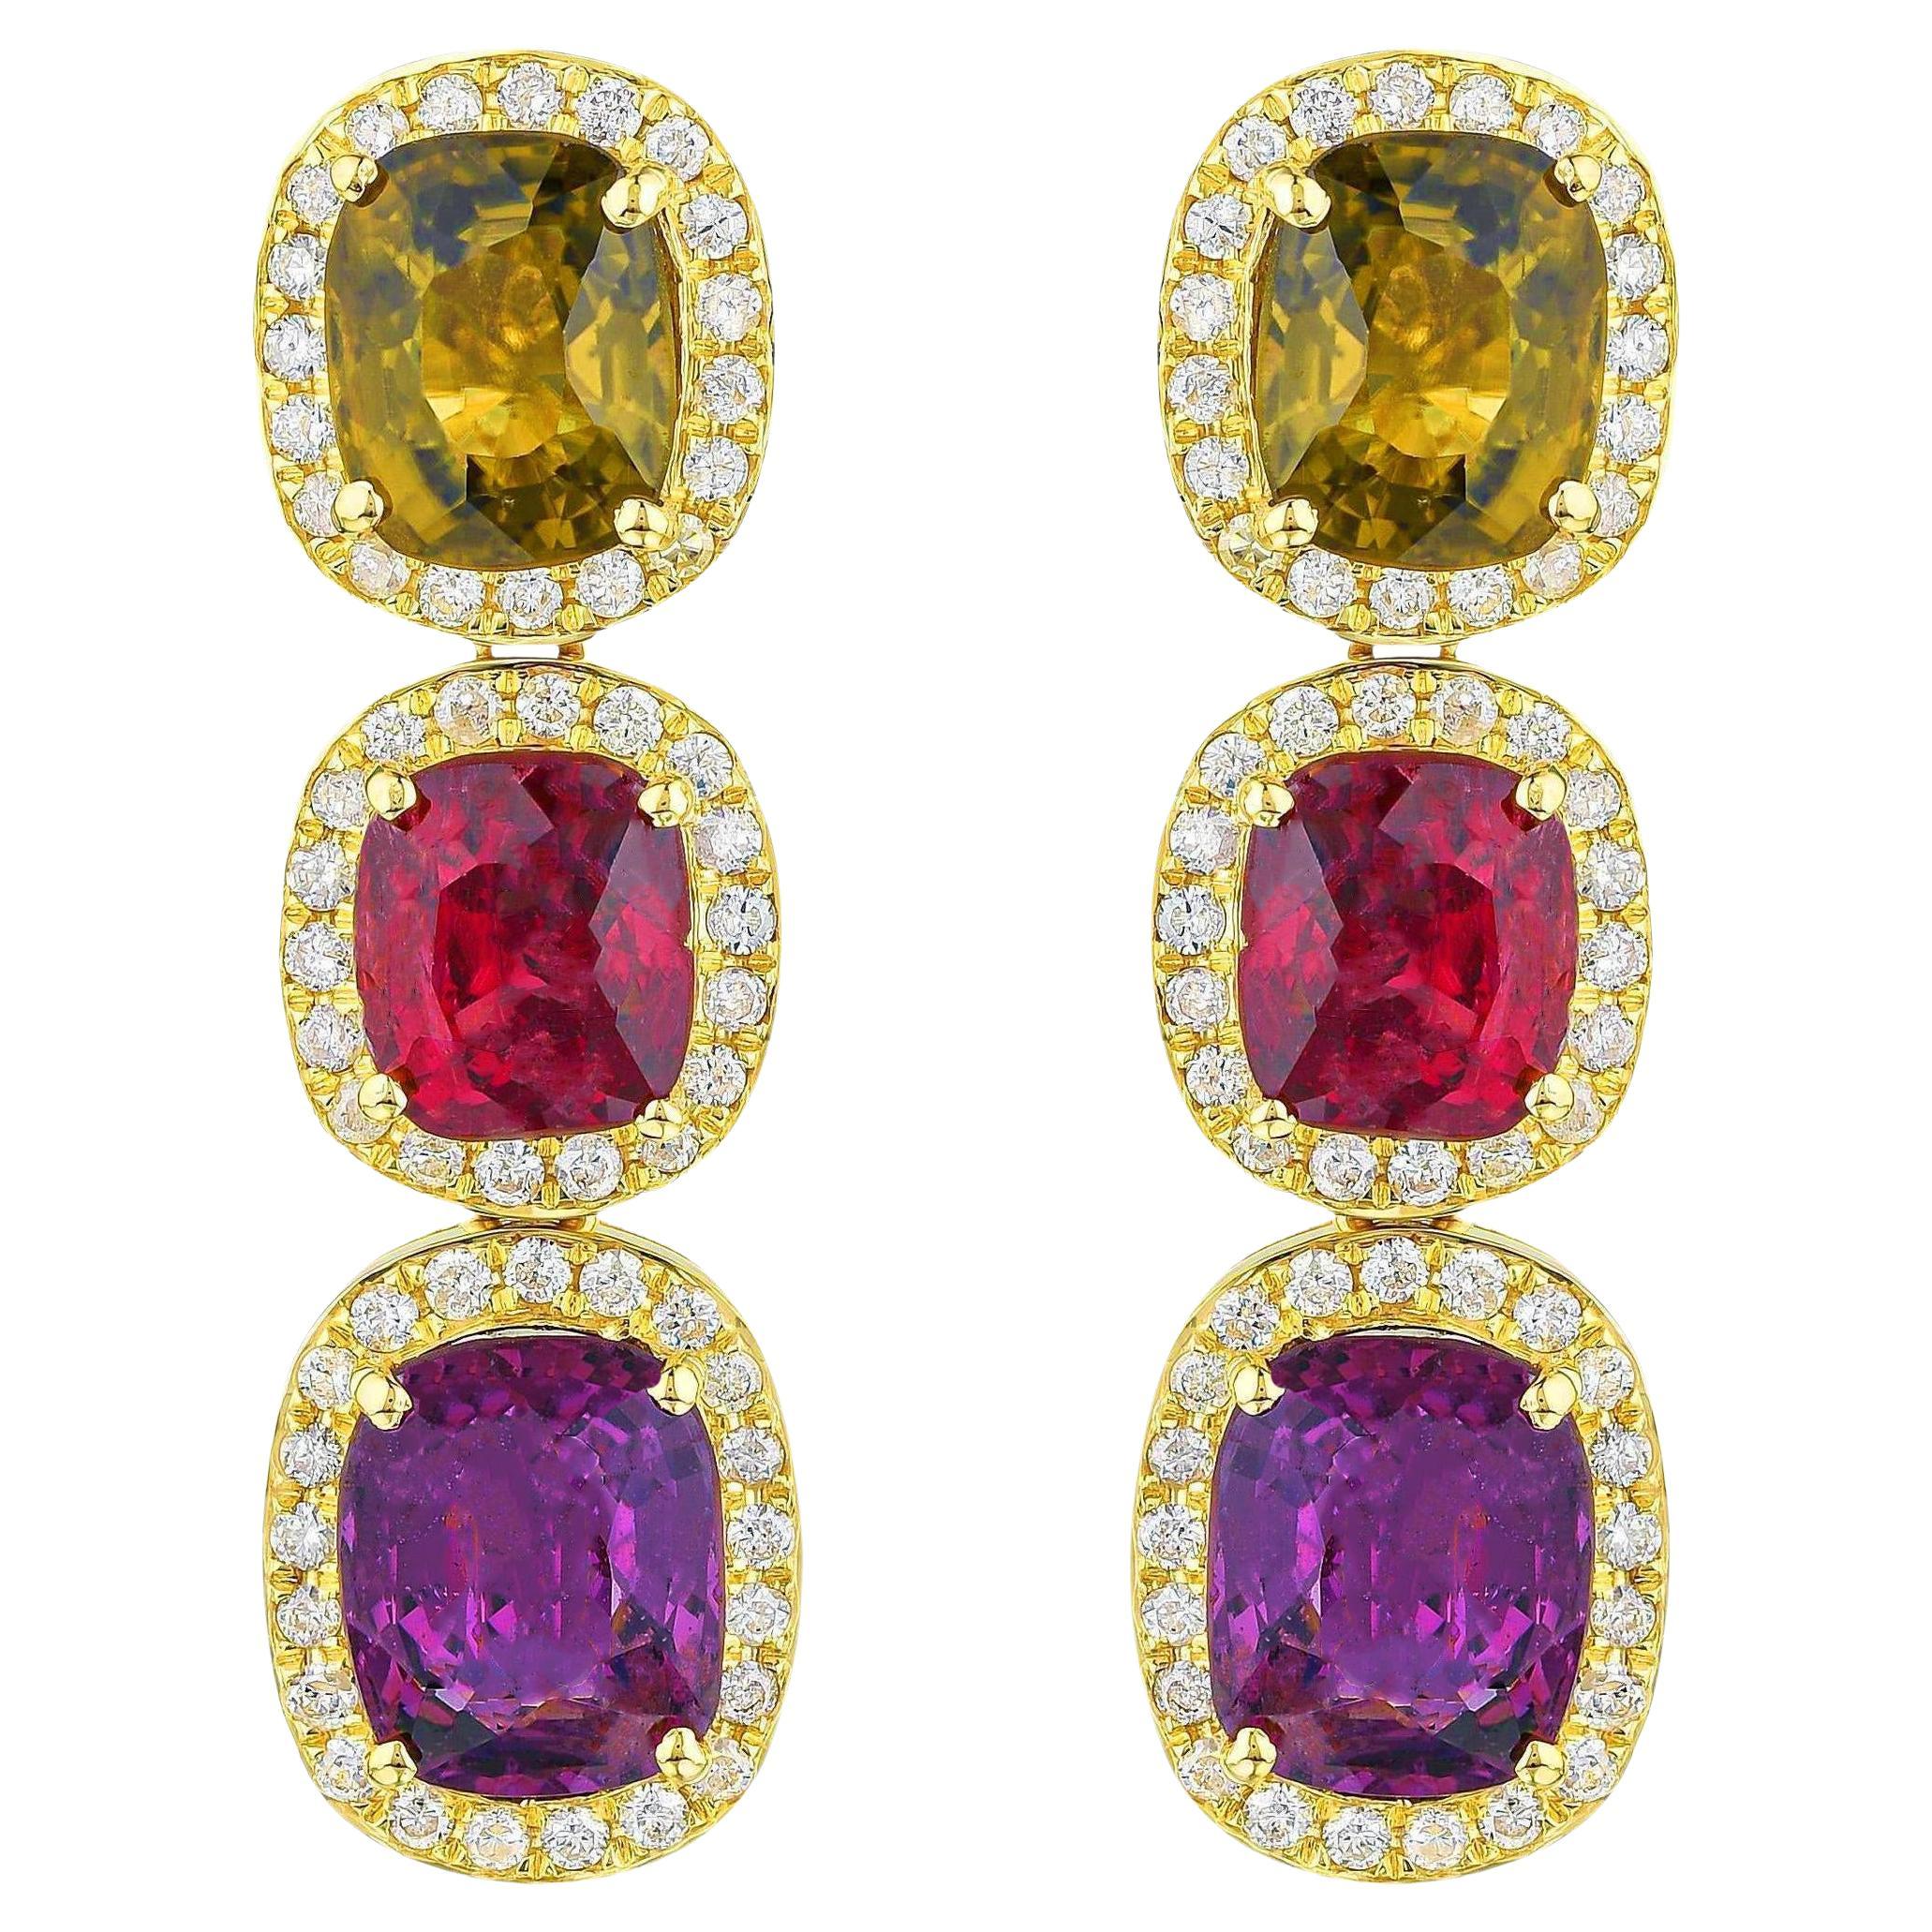 Rare Natural Multicolored Spinel Earrings Diamond Halo 8.50 Carats 18K Gold